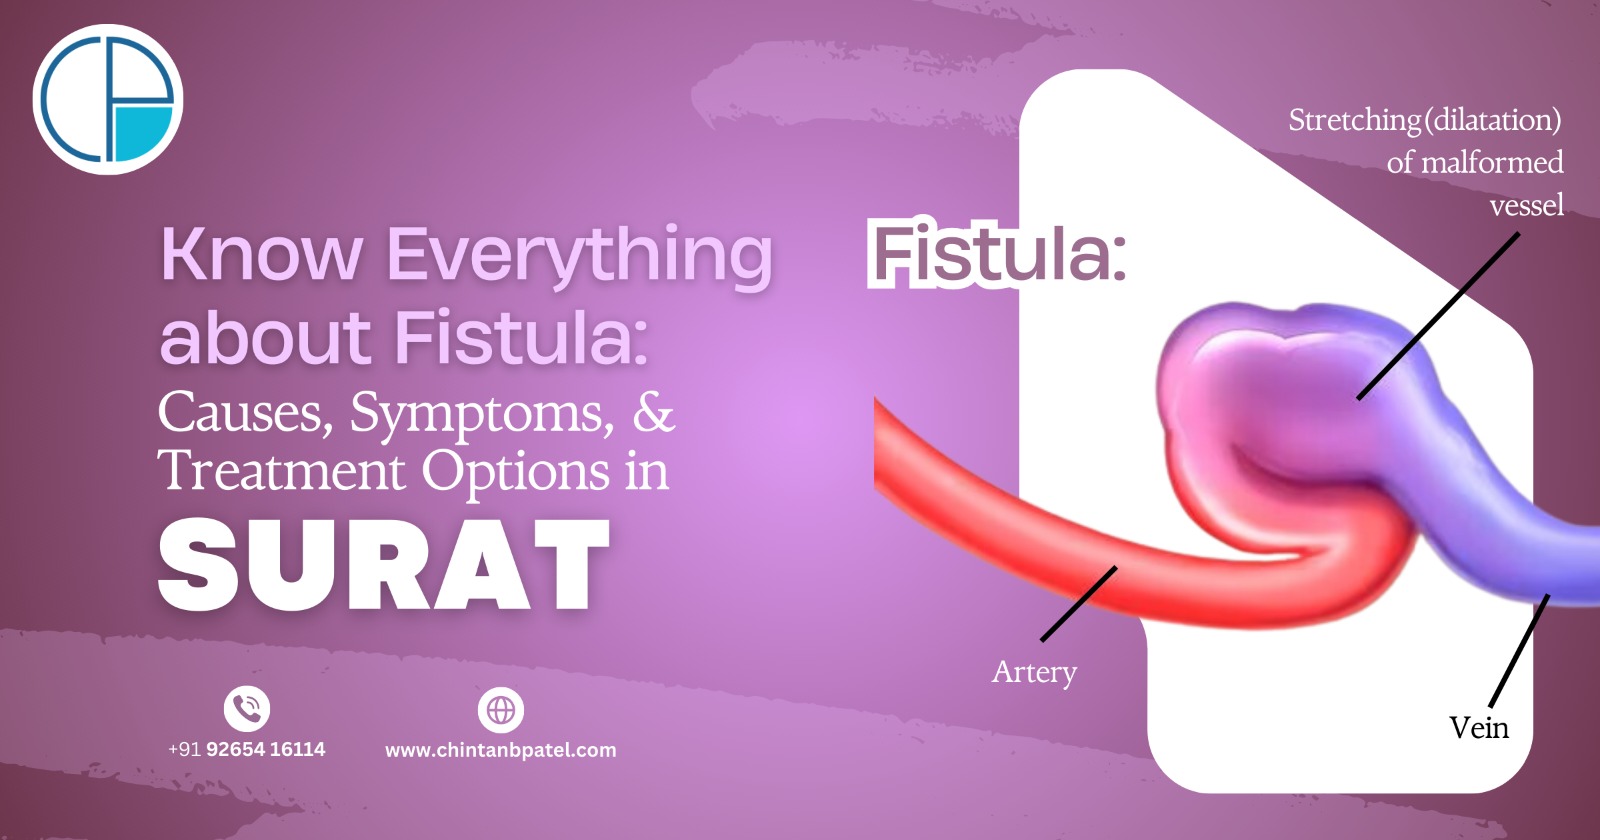 Know Everything about Fistula: Causes, Symptoms, and Treatment Options in Surat